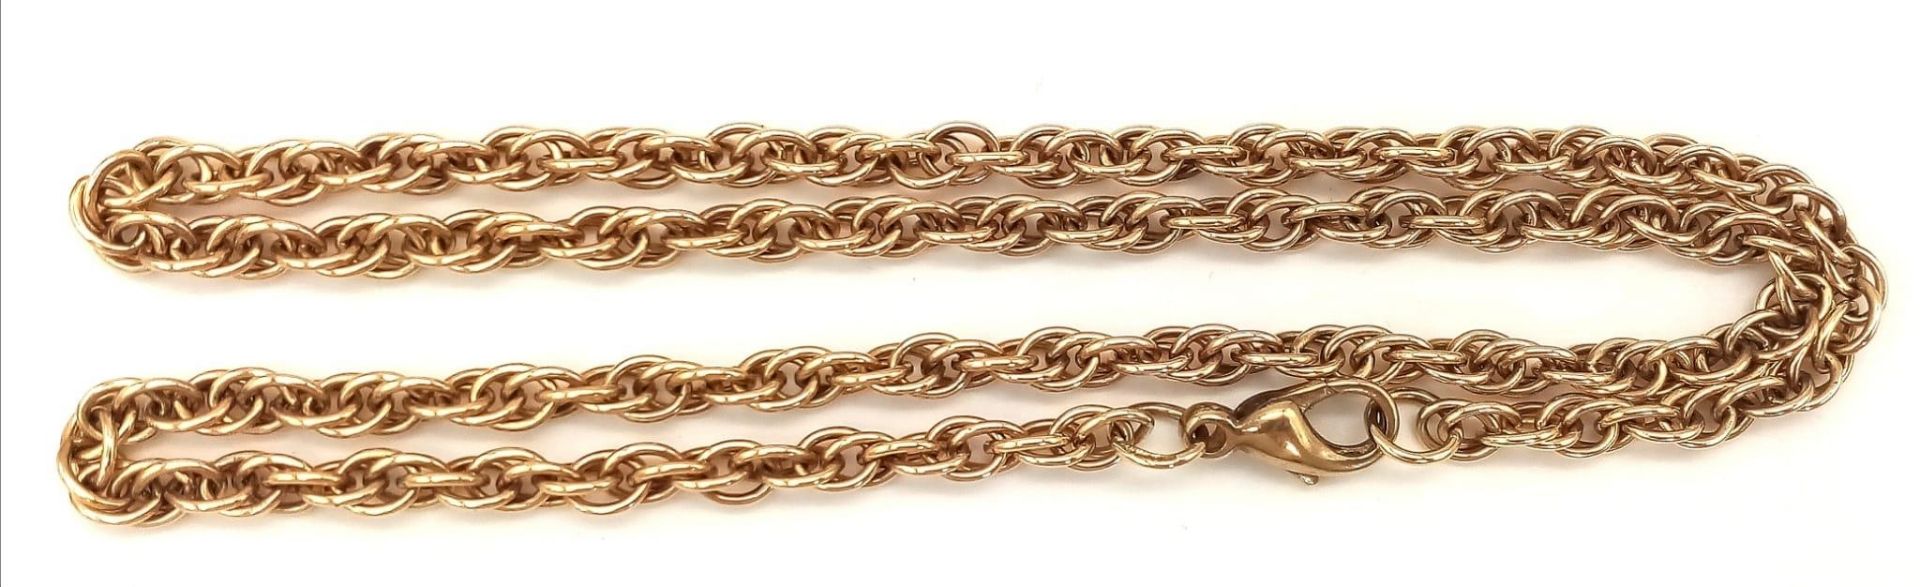 A Classic 9K Yellow Gold Rope Necklace. 44cm. 17.77g - Image 4 of 4